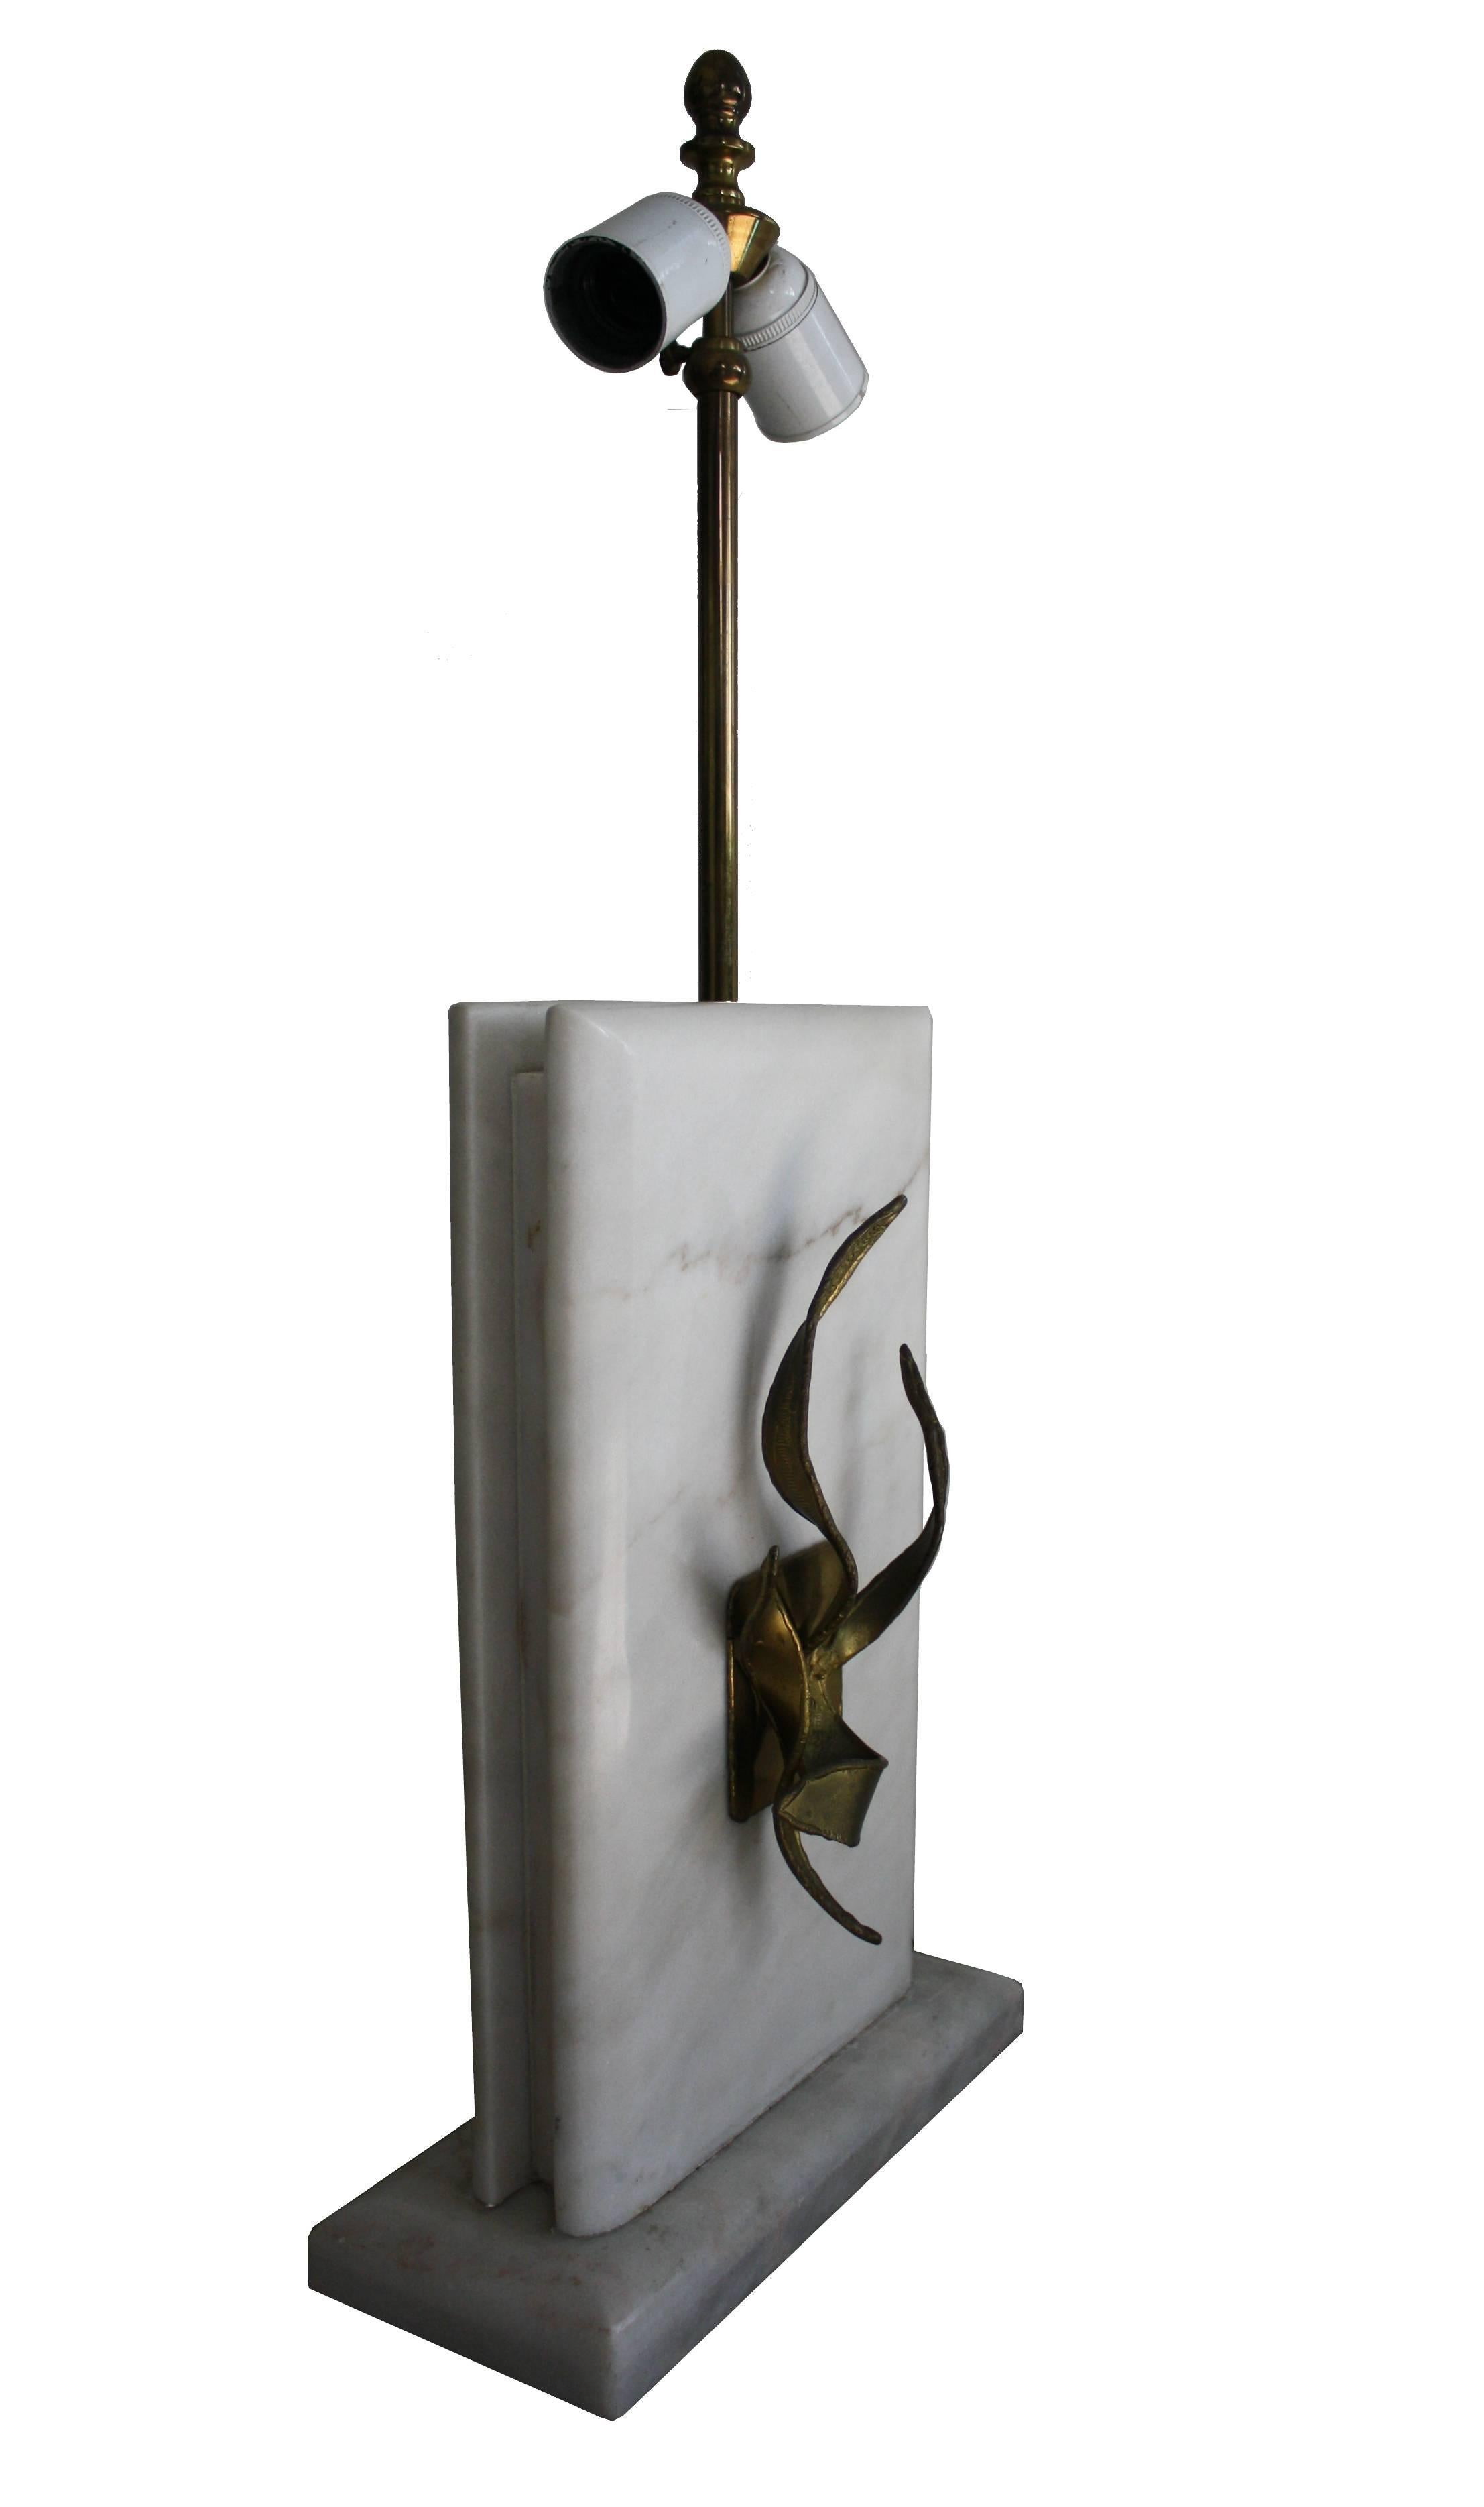 Impressive white marble table lamp with brass leaves by Roger Vanhevel.

Classy Regency style design combined with a heavy marble stone.

The lamp has two lightpoints.

Very good condition.

Tested and ready for use with E27 lamp.

1970s,